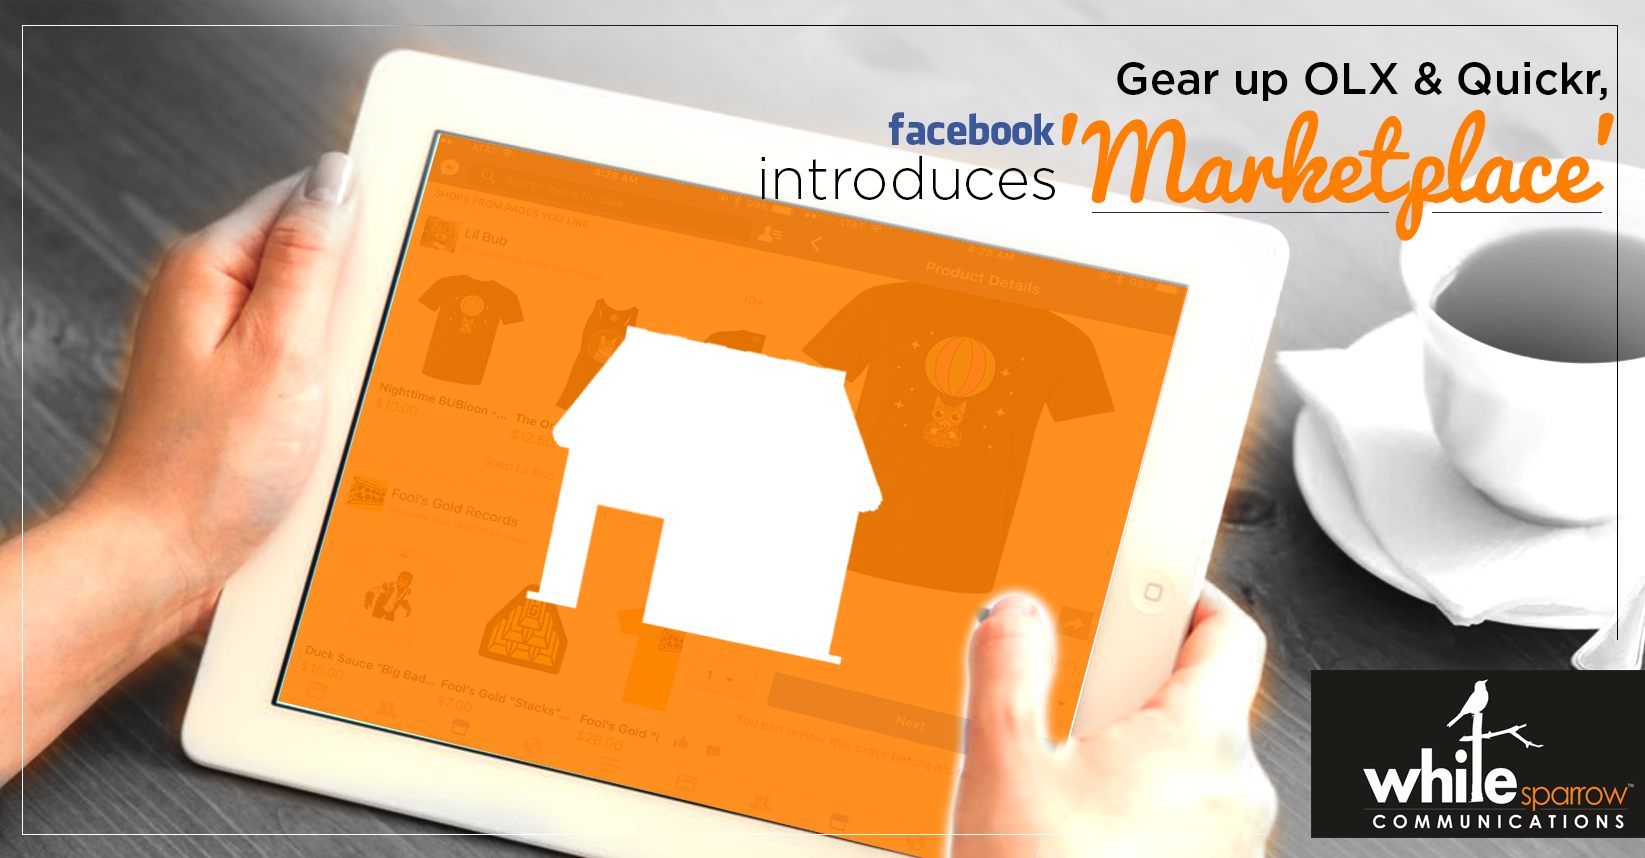 Buy,  Sell,  & Dicover with Your Local Community! Facebook introduces ‘Marketplace’!